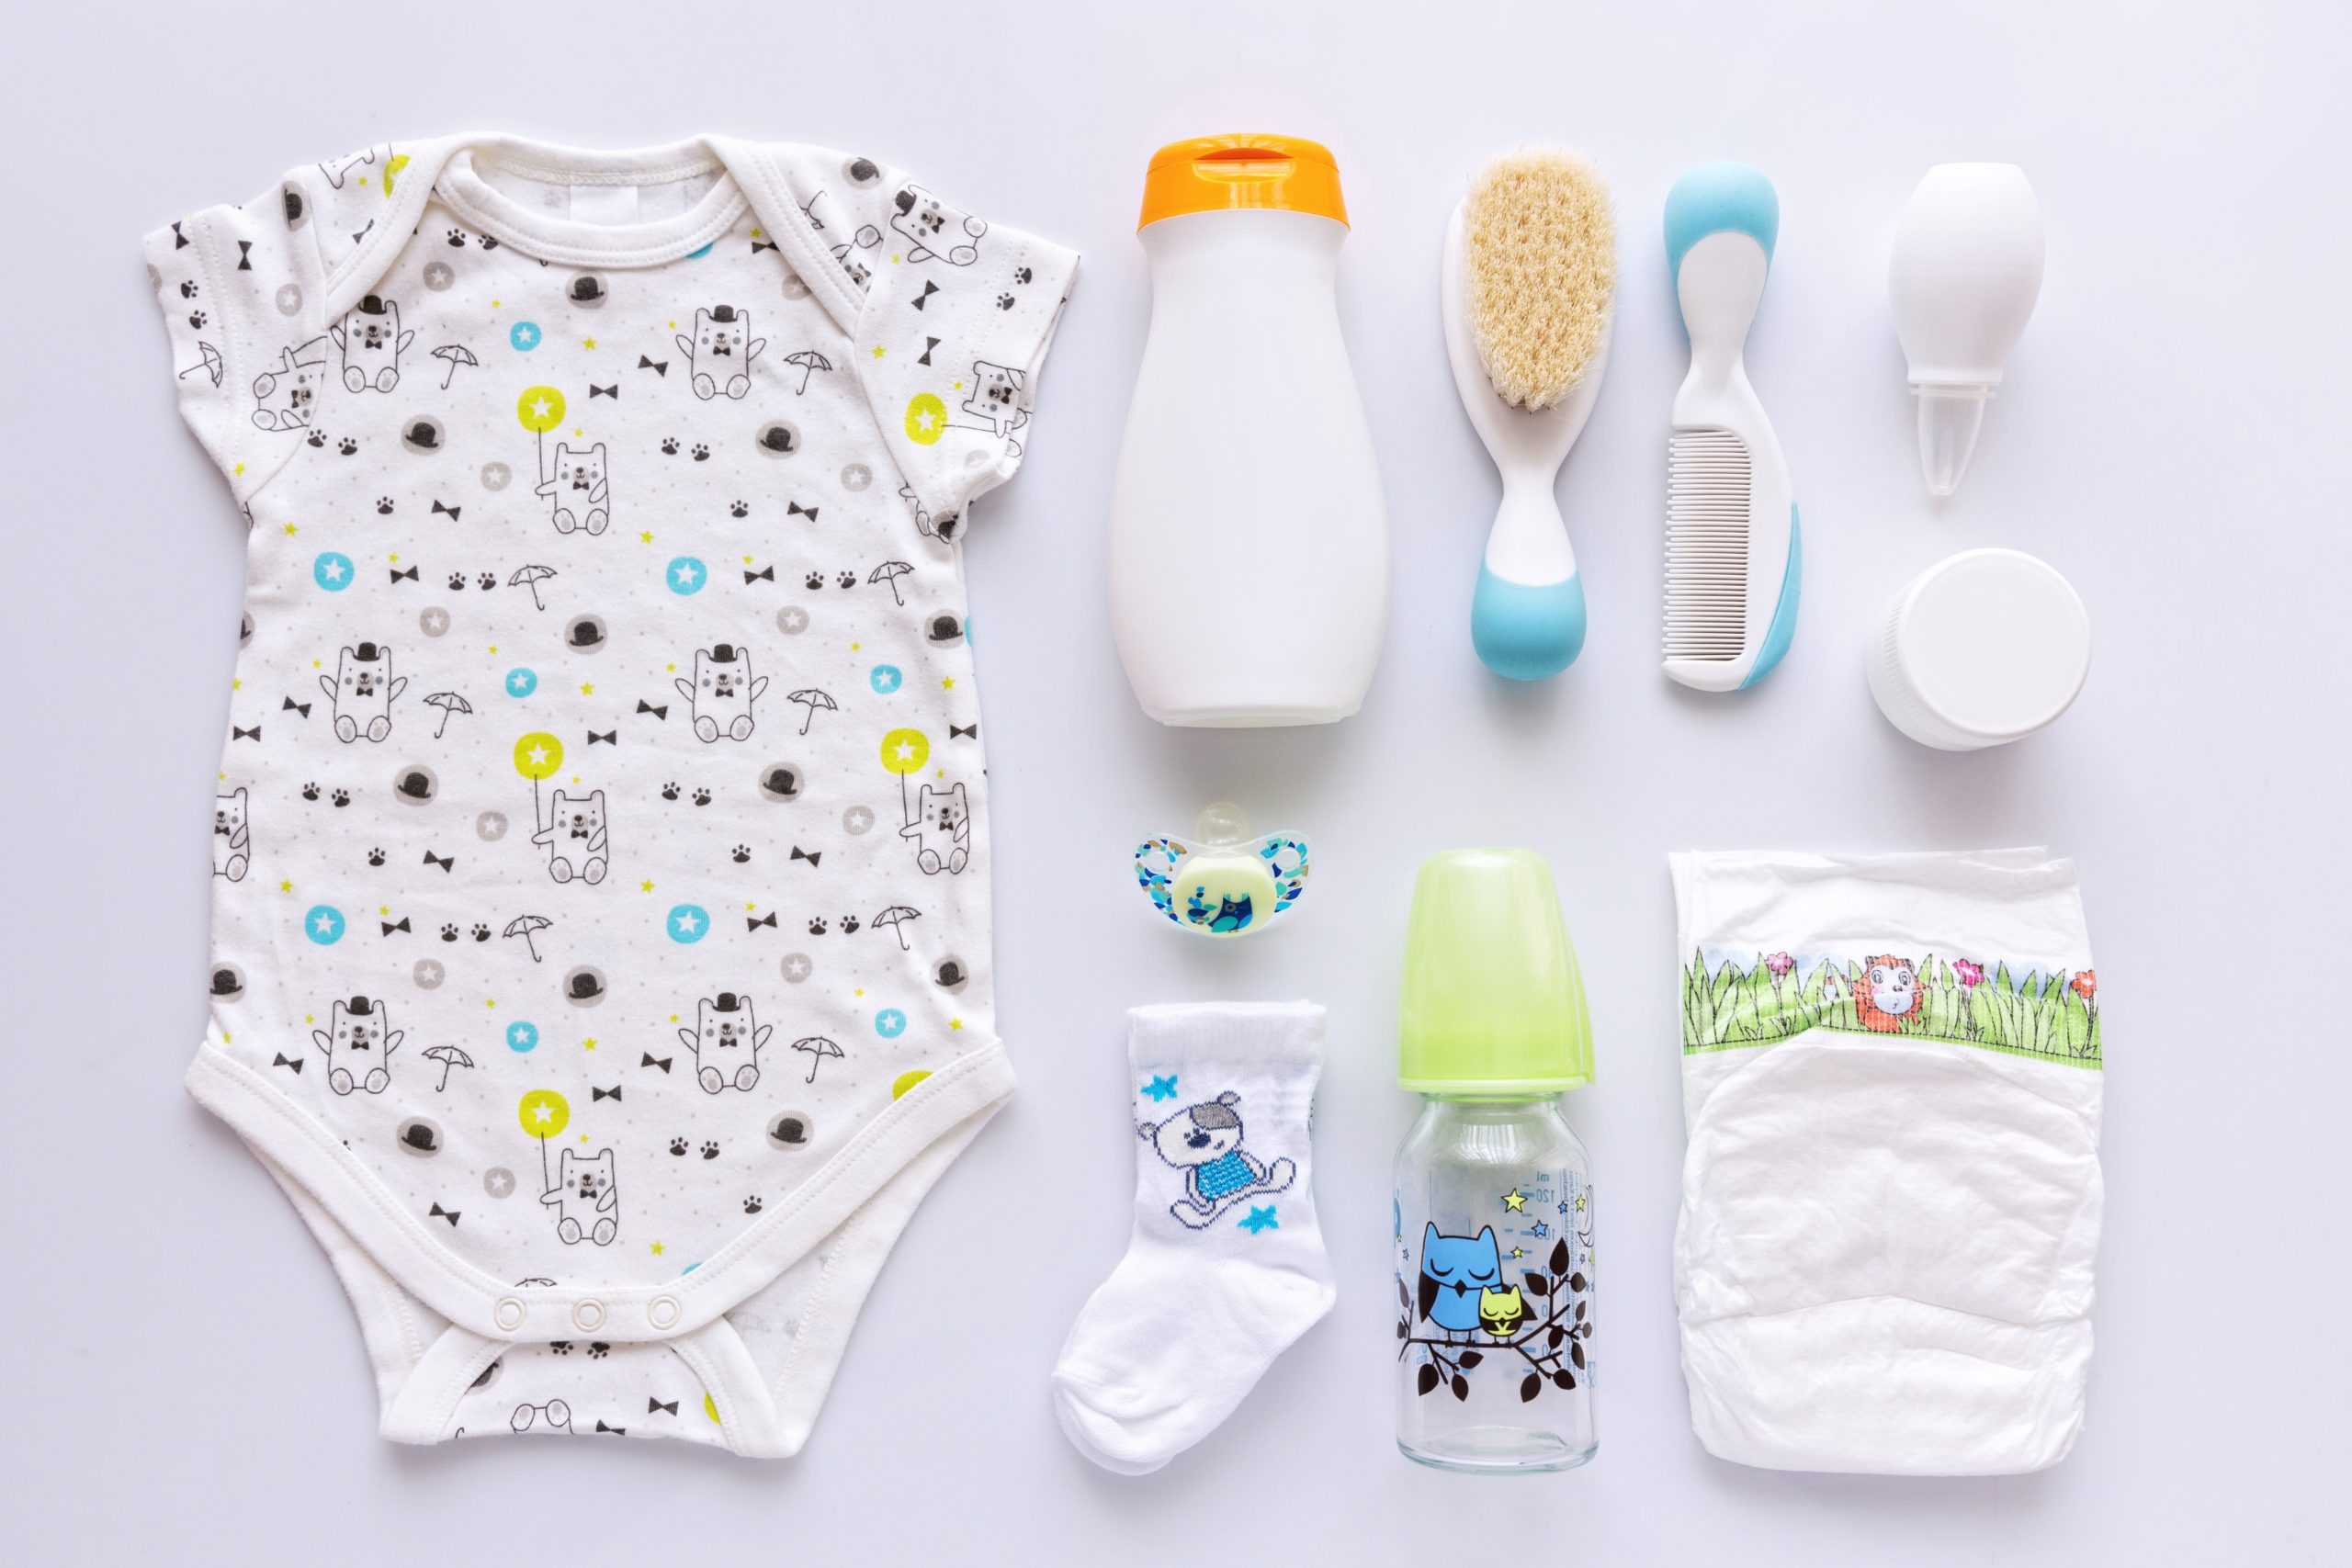 Display of items to prepare for a newborn baby. Onesie, bottle, other essentials